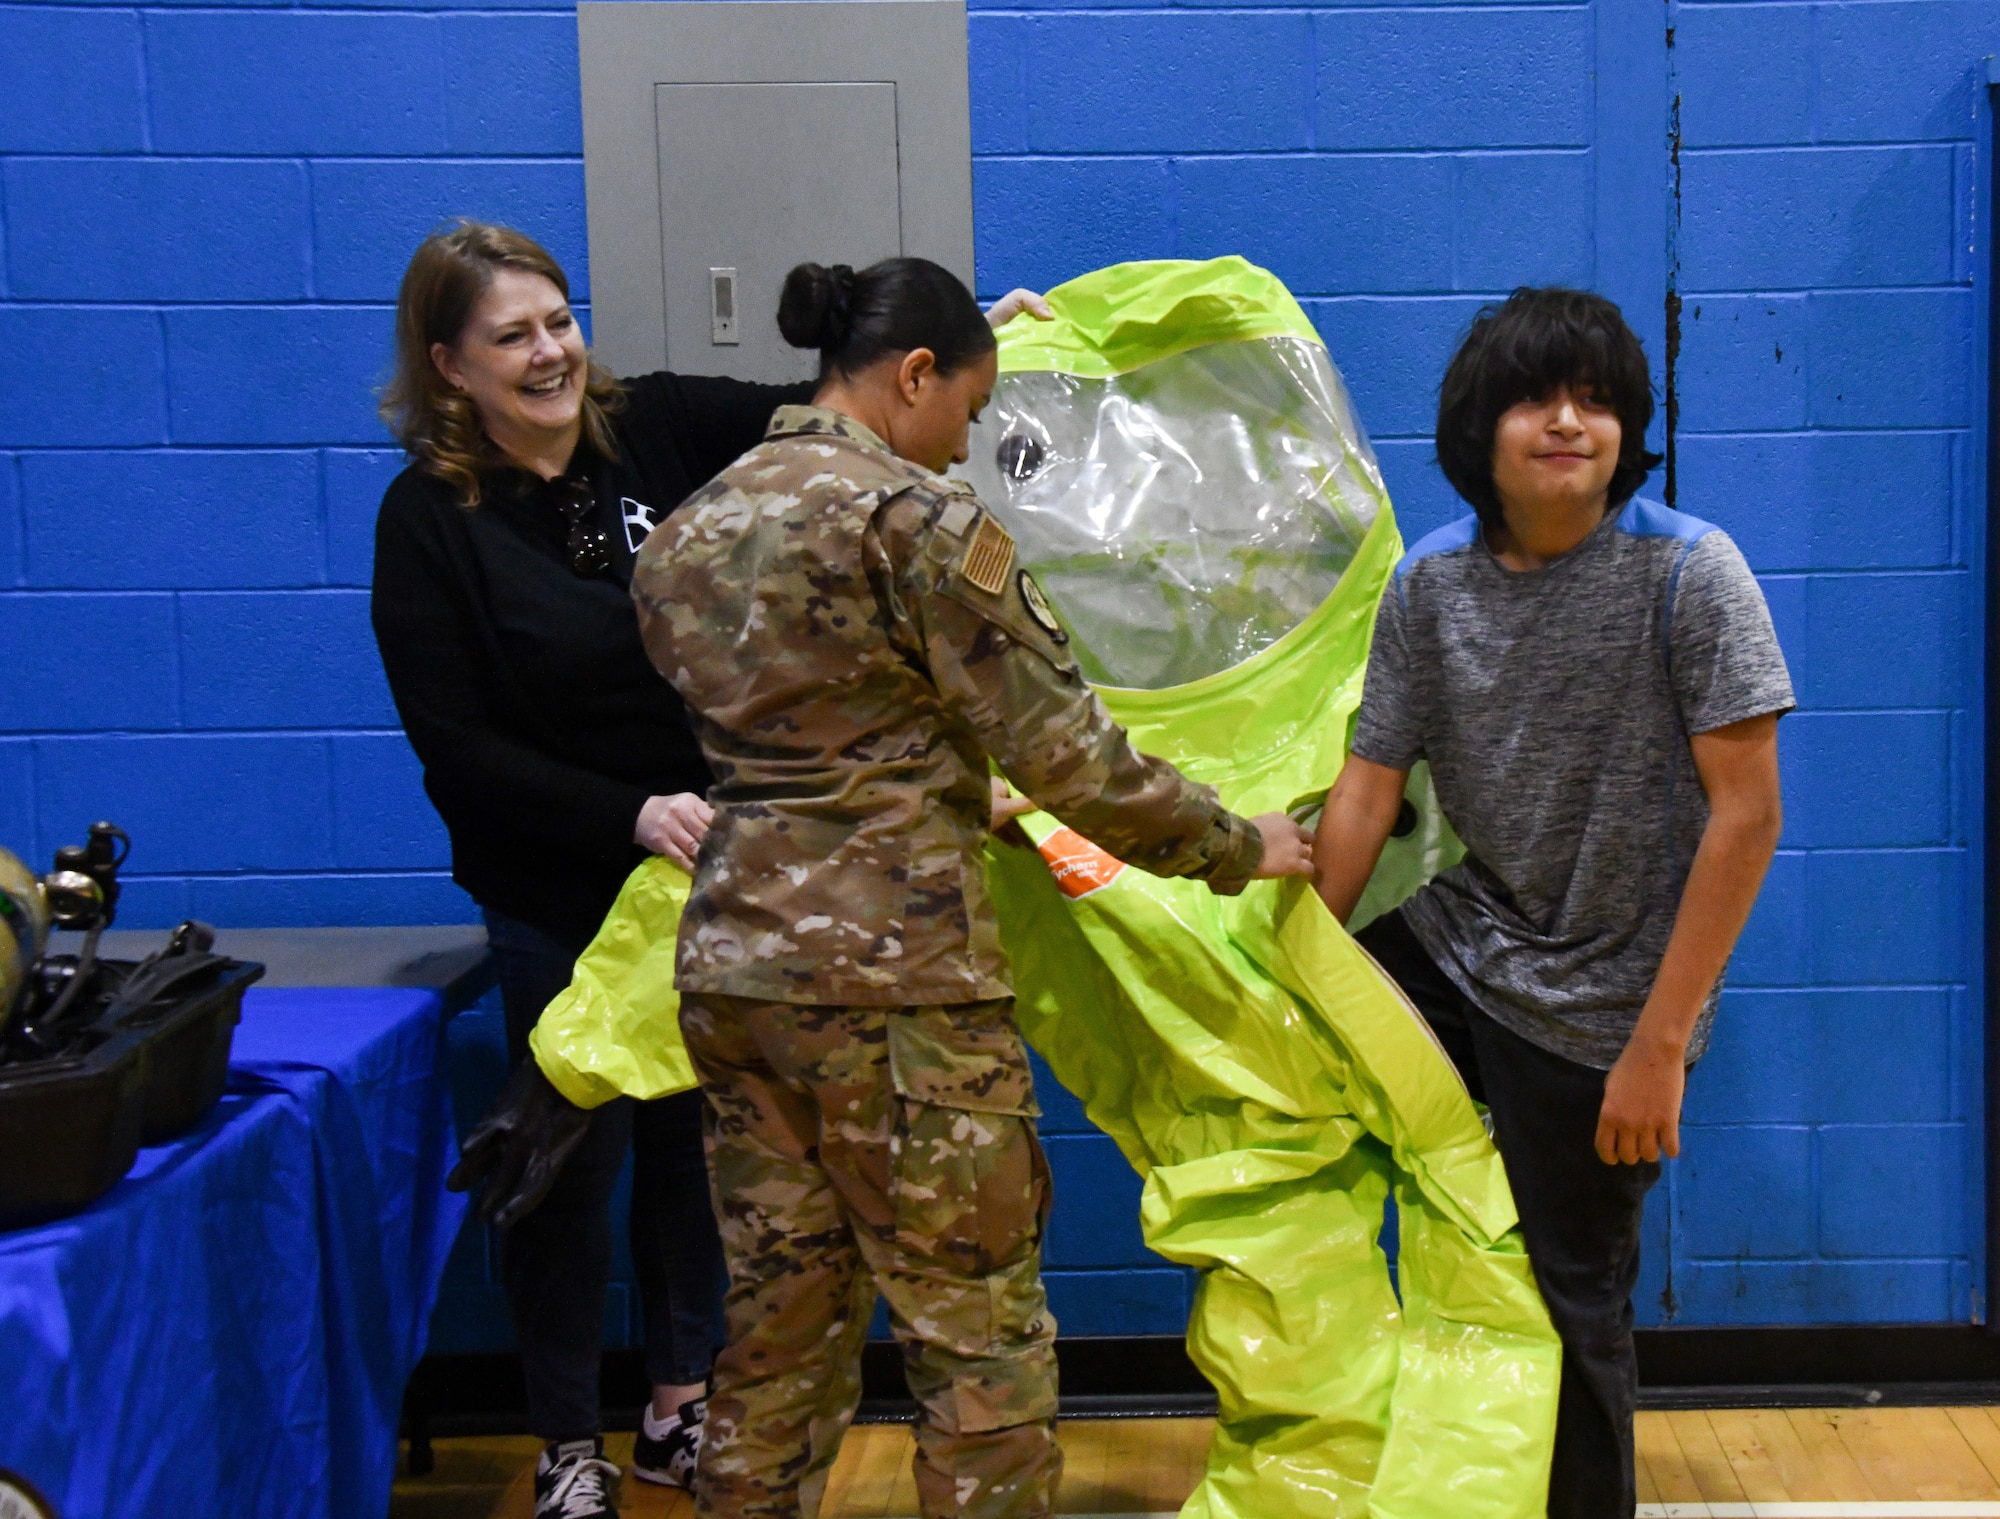 A student from Altus Junior High School tries on a Level A hazardous material (HAZMAT) suit at Altus High School, Altus, Oklahoma, March 30, 2022. Level A HAZMAT suits are utilized by members of the 97th Civil Engineering Squadron’s Readiness and Emergency Management Flight to protect the wearer from hazardous chemicals, biological agents and radioactive materials. (U.S. Air Force photo by Airman 1st Class Miyah Gray)